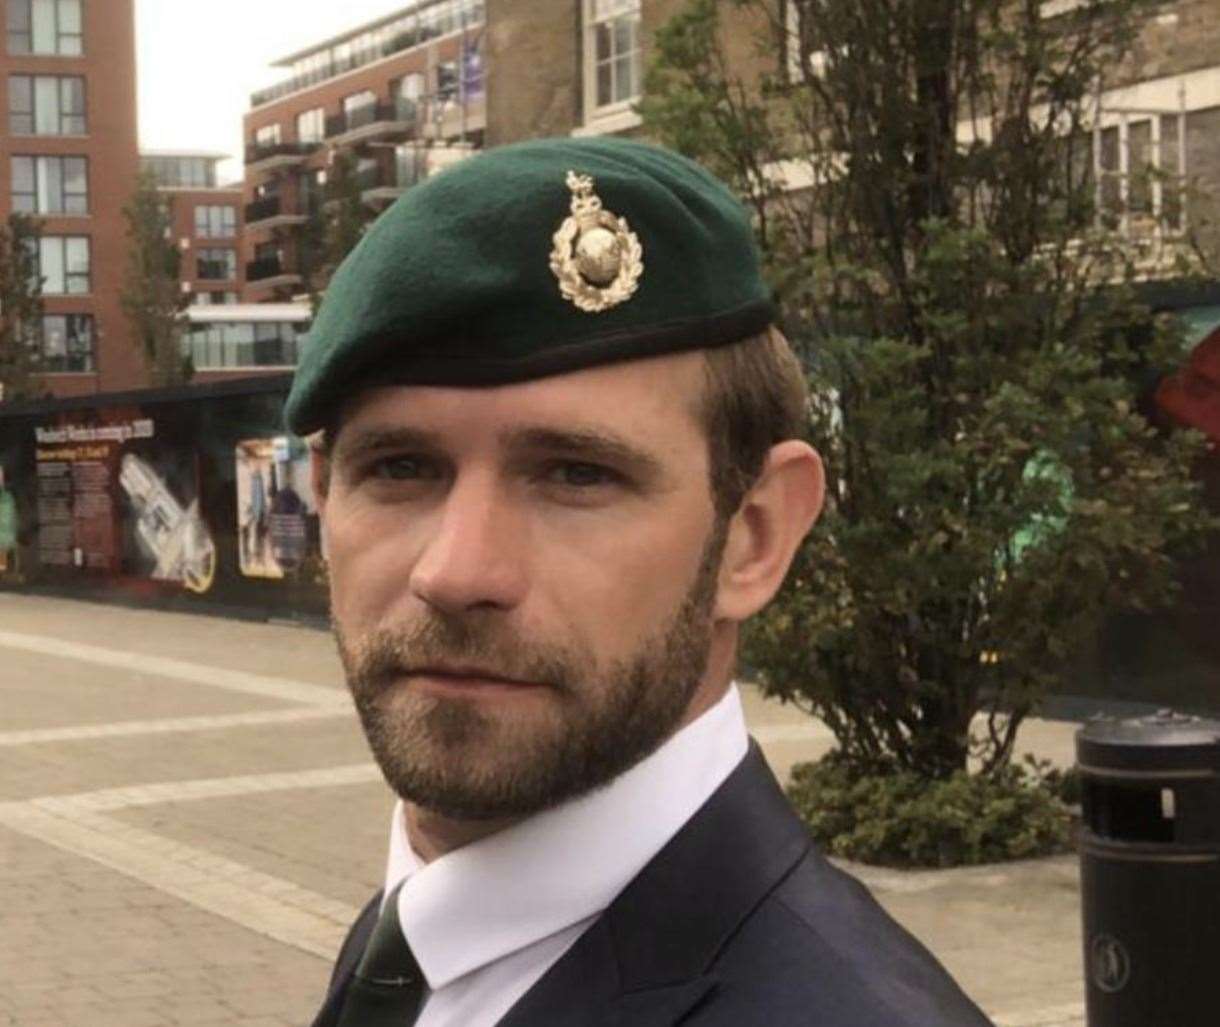 Dave Jones, a former Royal Marine, from Sutton Valence